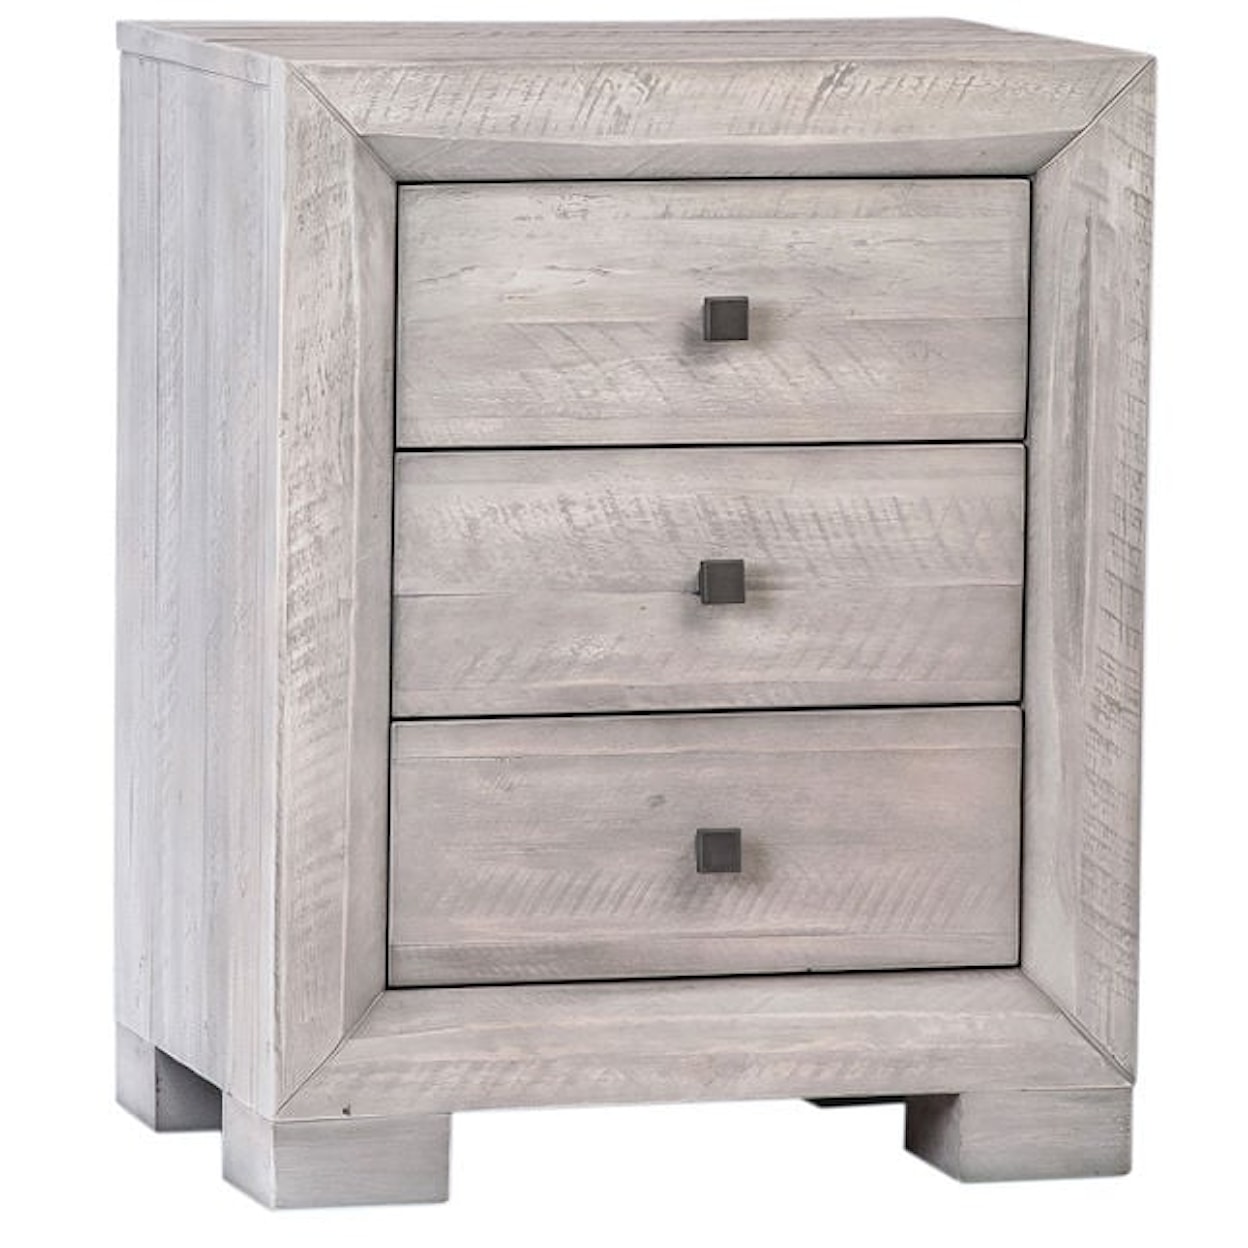 Dovetail Furniture Clancy Clancy Nightstand